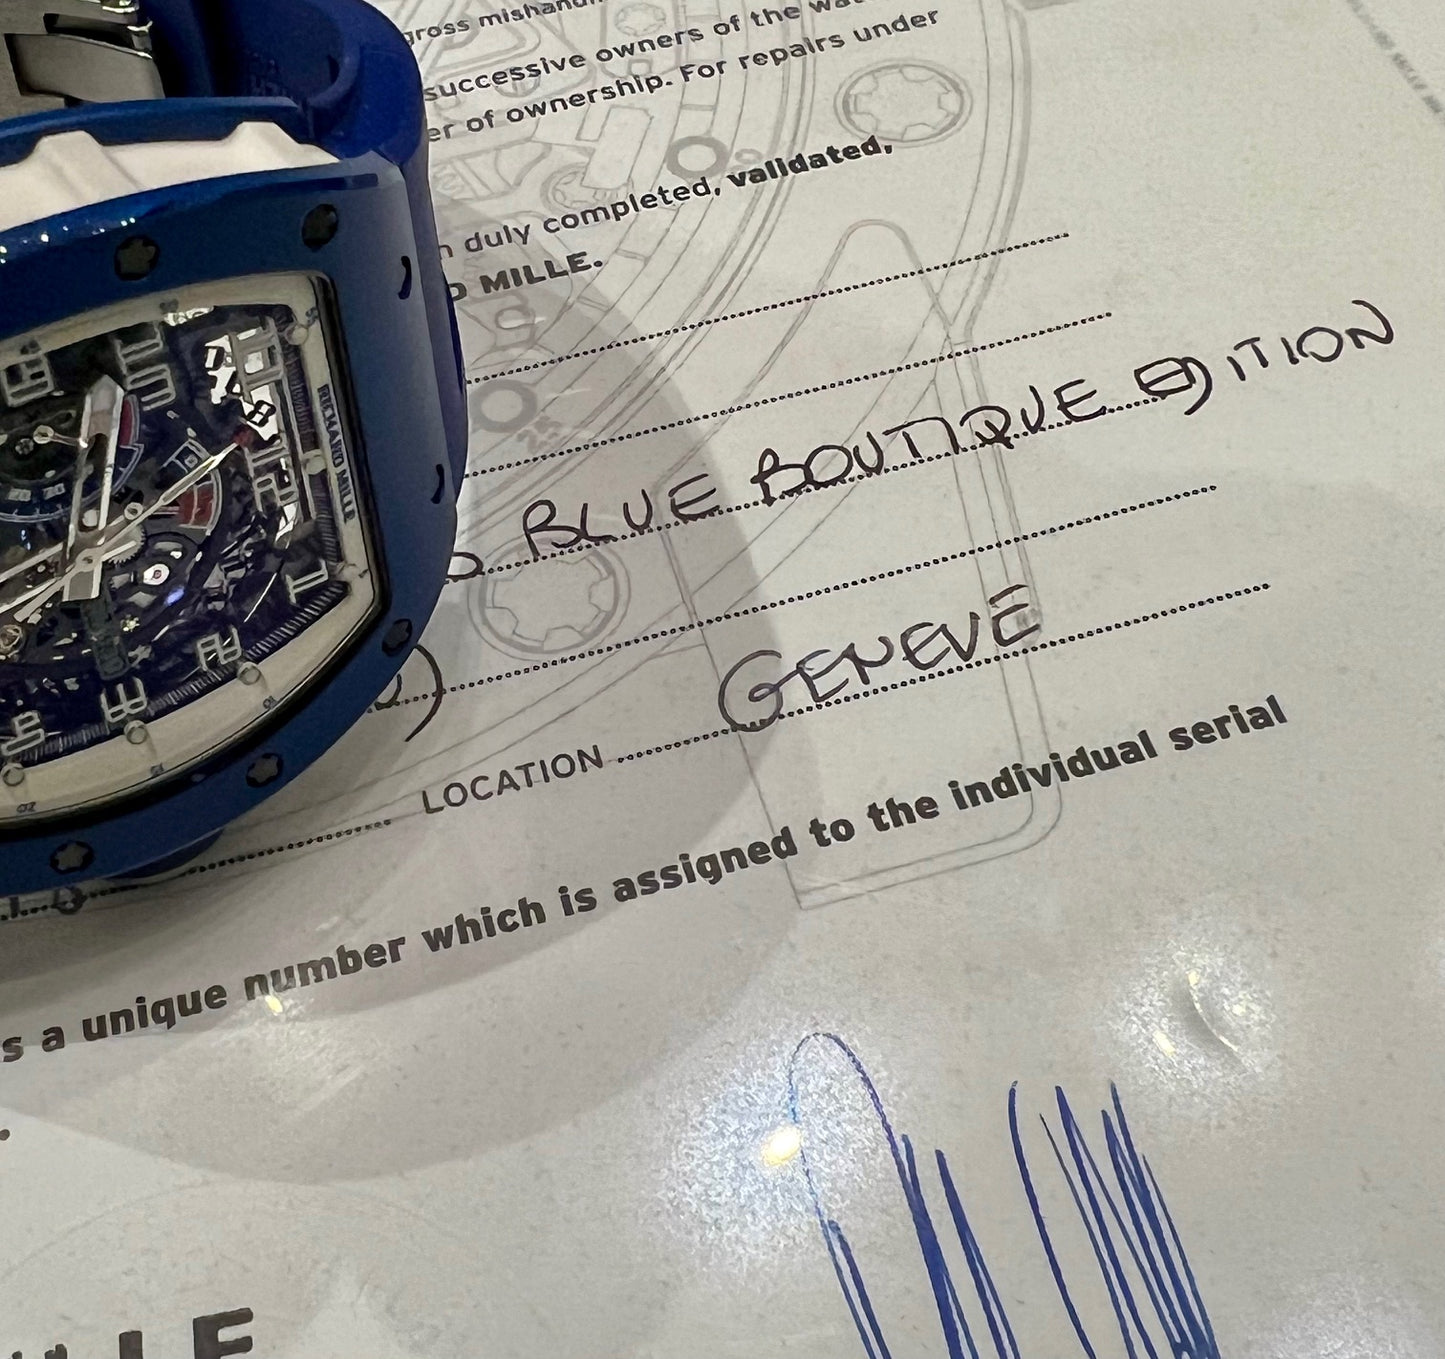 Richard Mille Rm 030 blue Boutique Edition limited 100PZ 2018 Like new